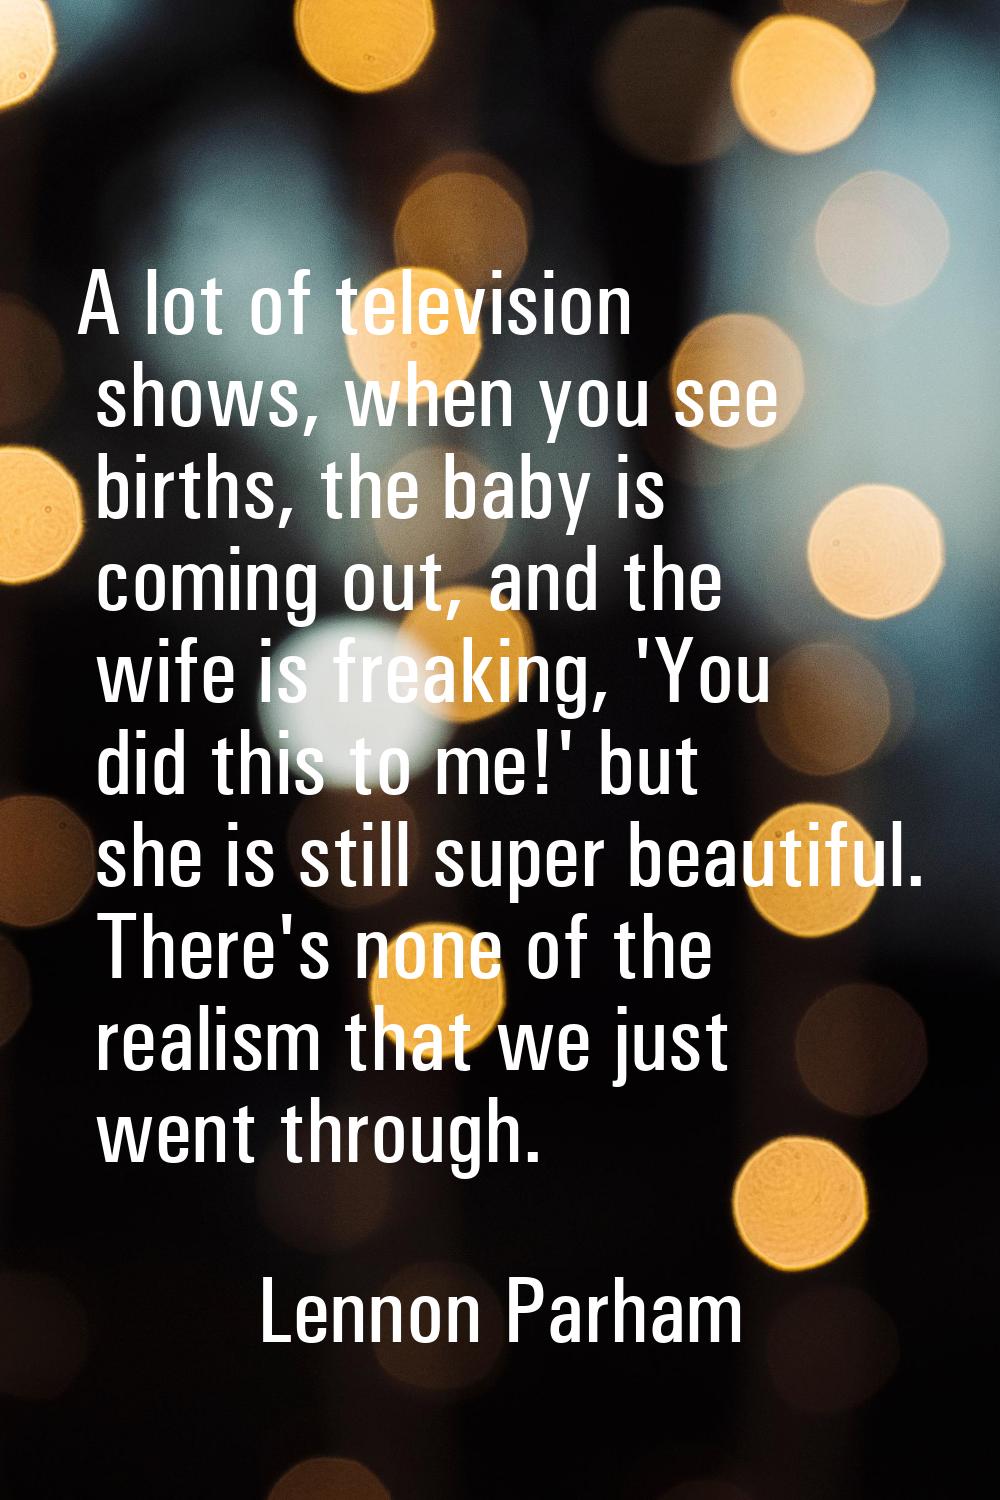 A lot of television shows, when you see births, the baby is coming out, and the wife is freaking, '